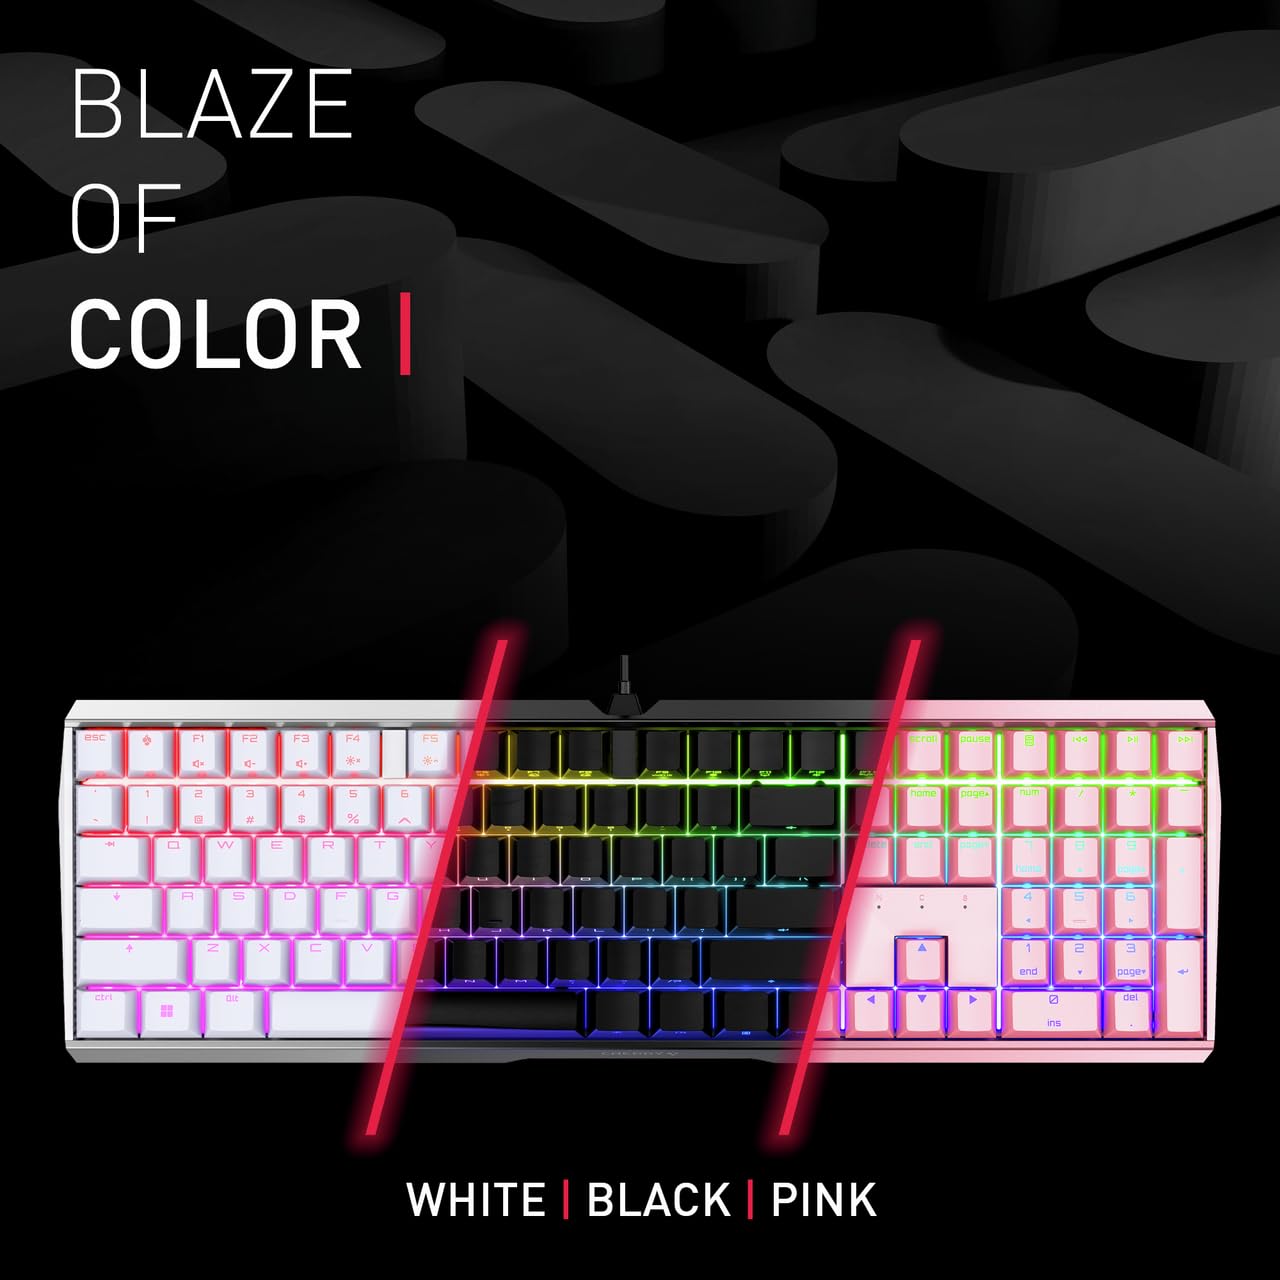 Cherry MX Board 3.0 S Wired Gamer Mechanical Keyboard with Aluminum Housing - MX Brown Switches (Slight Clicky) for Gaming and Office - Customizable RGB Backlighting - Full Size - Black